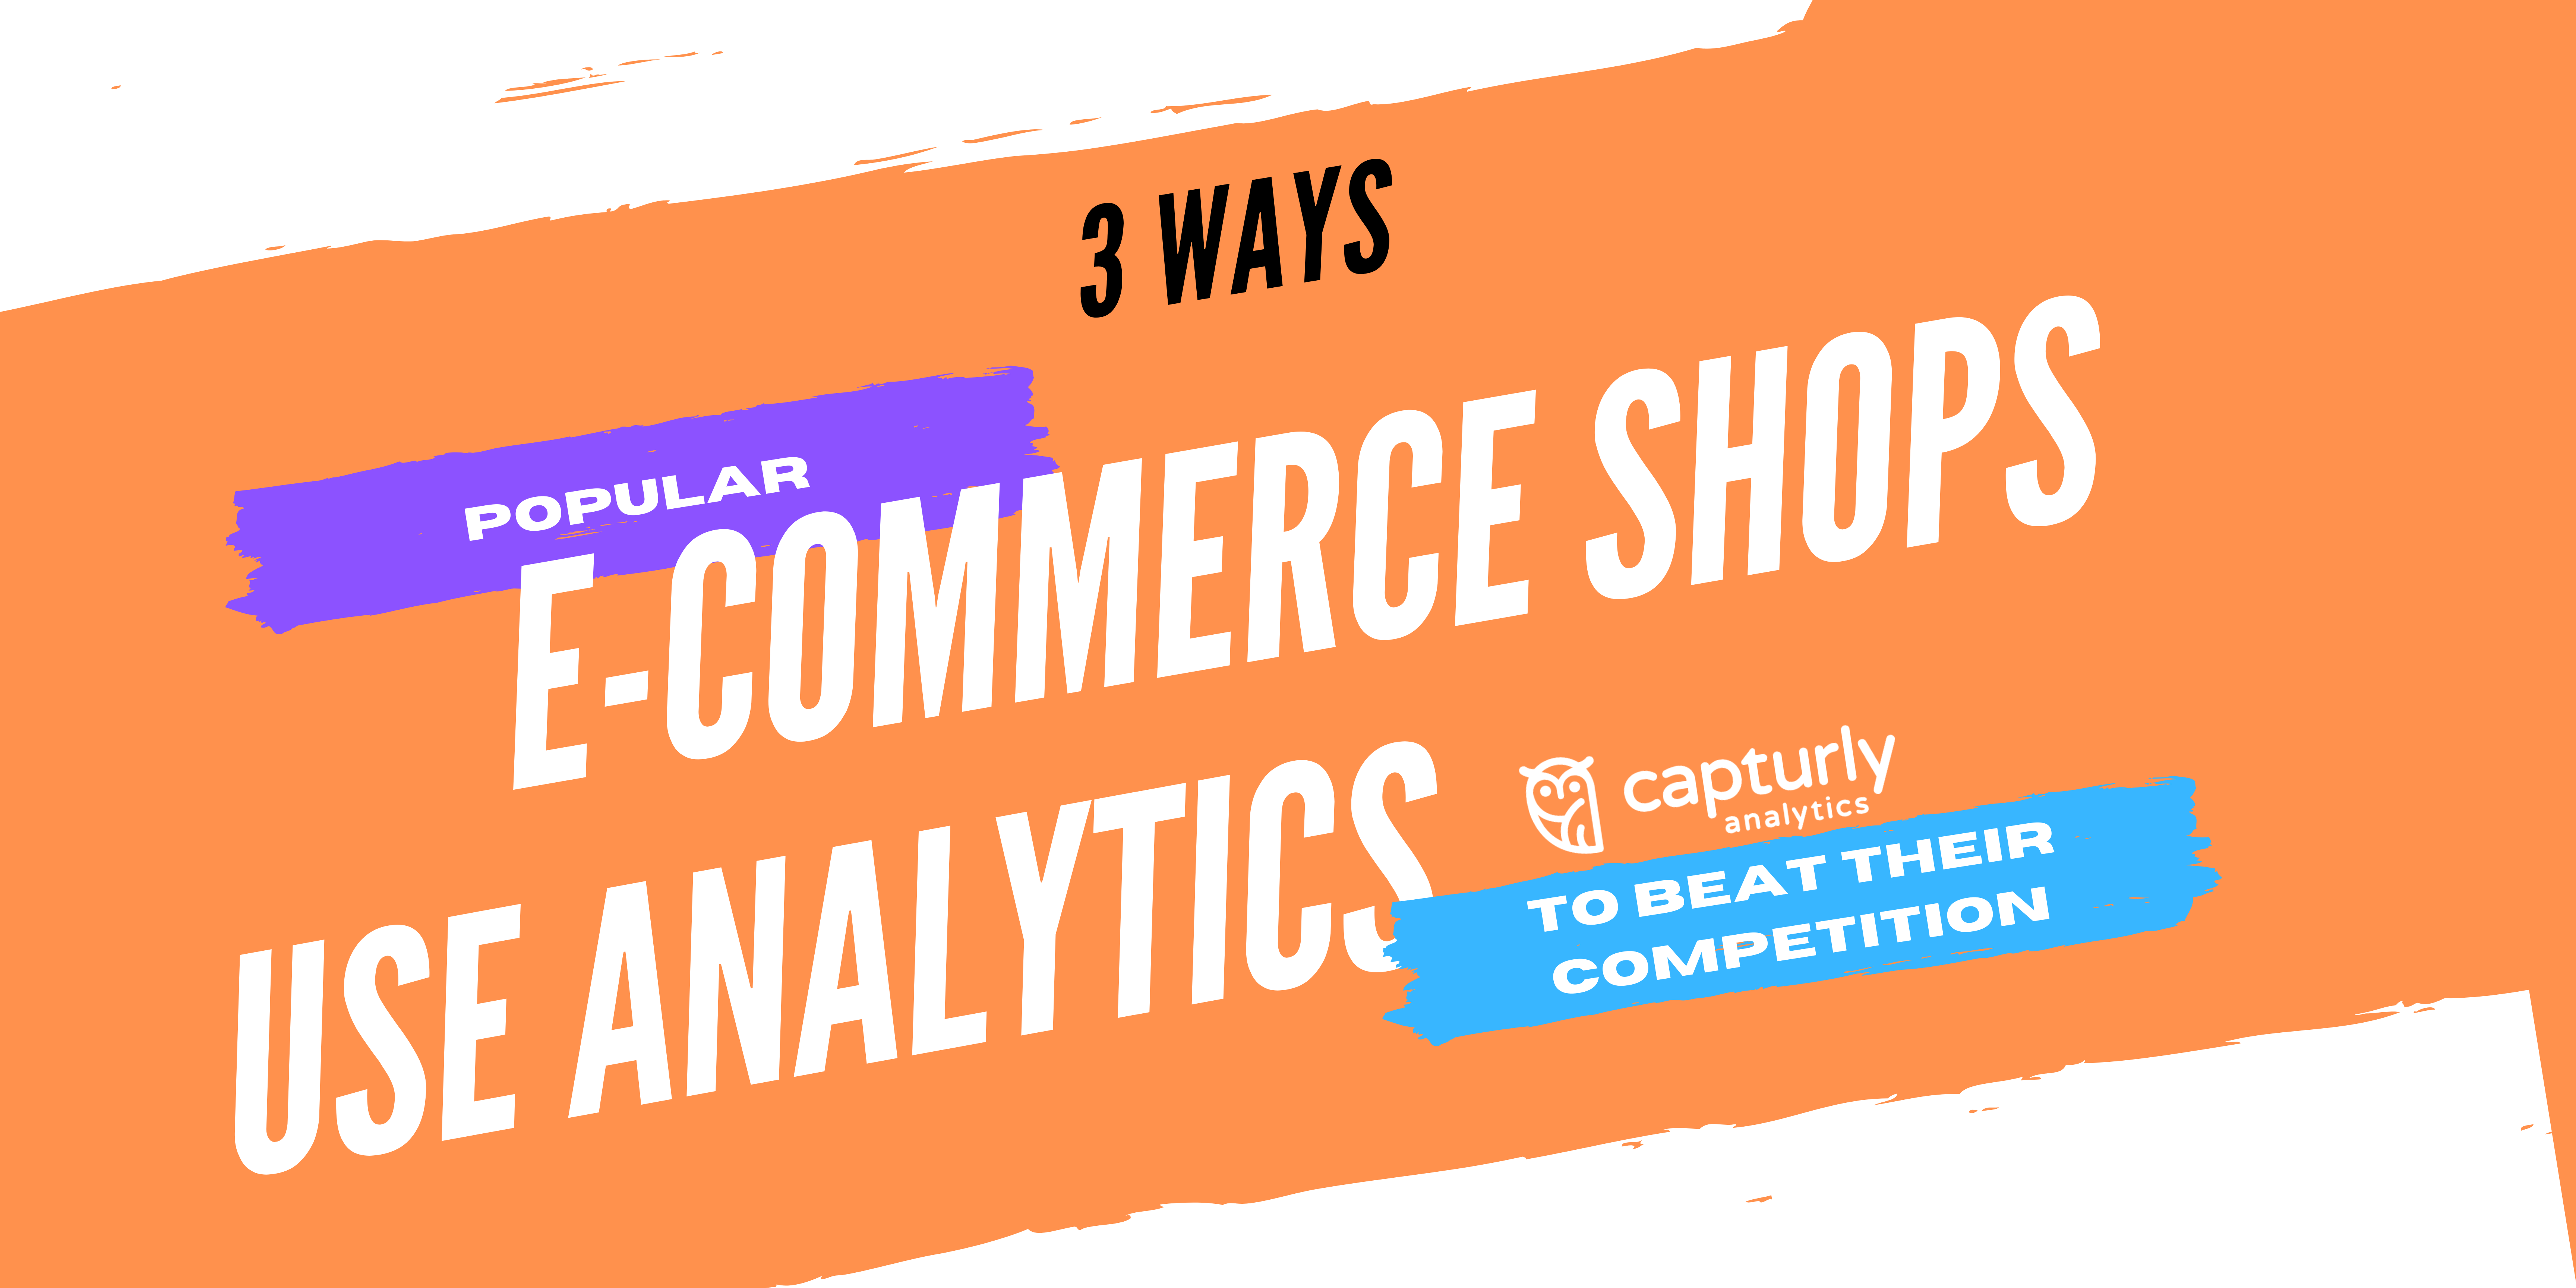 3 Ways Popular eCommerce Shops Use Analytics to Beat Their Competition